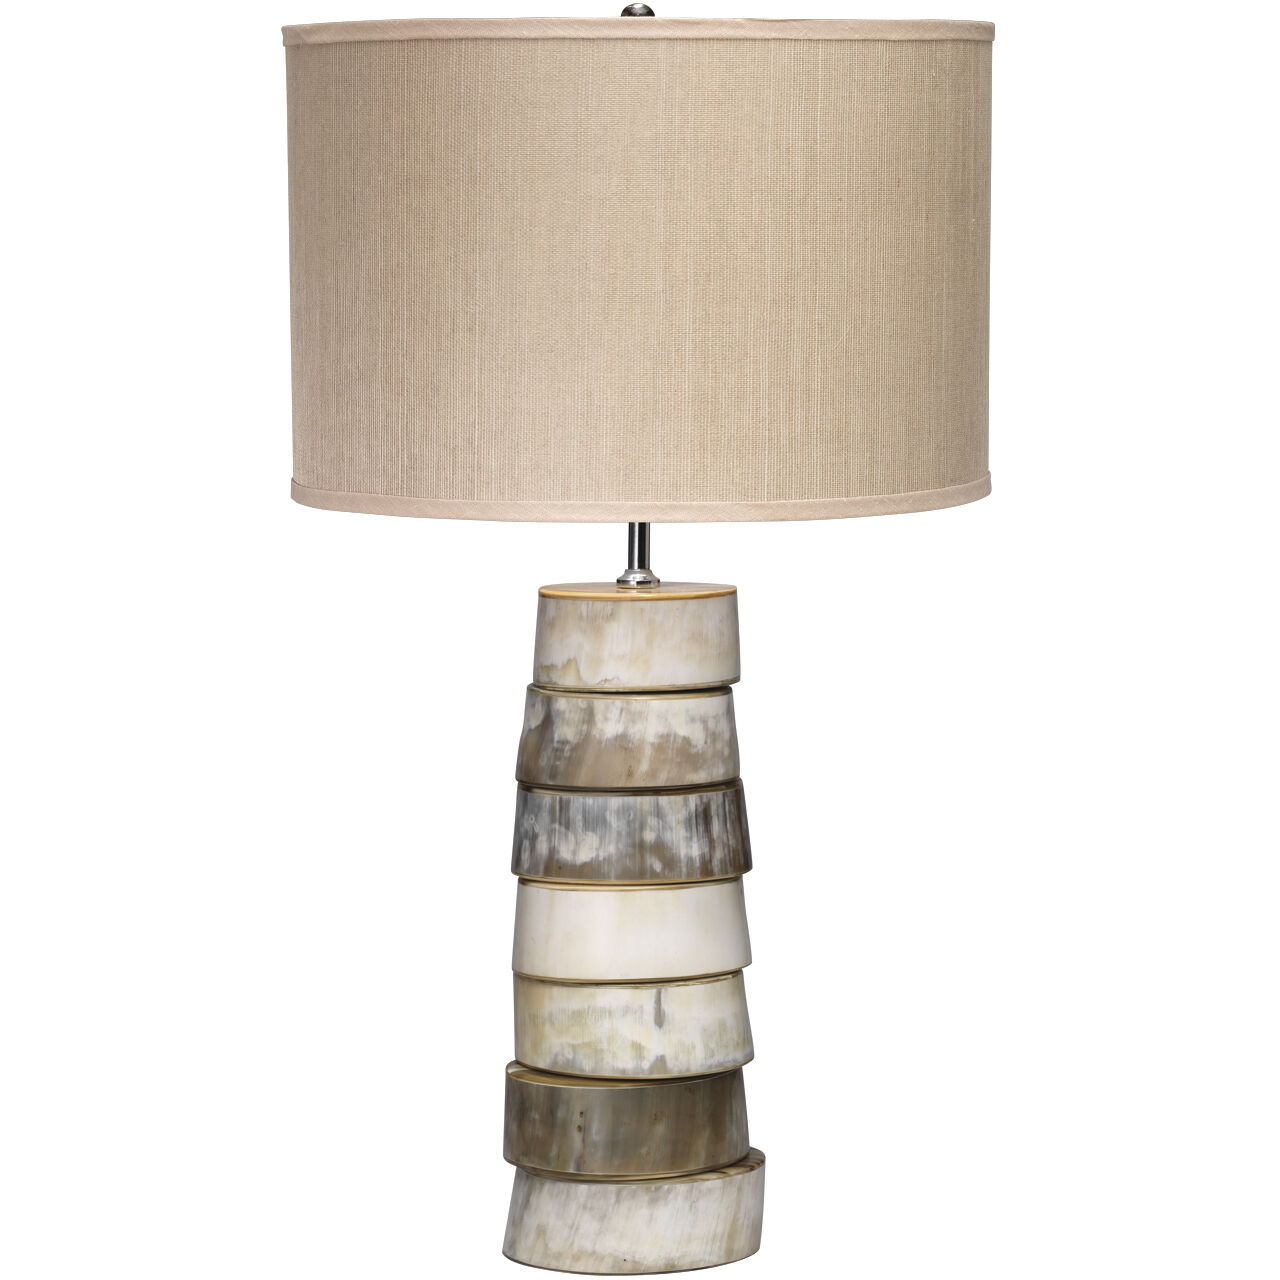 Stacked Horn Table Lamp